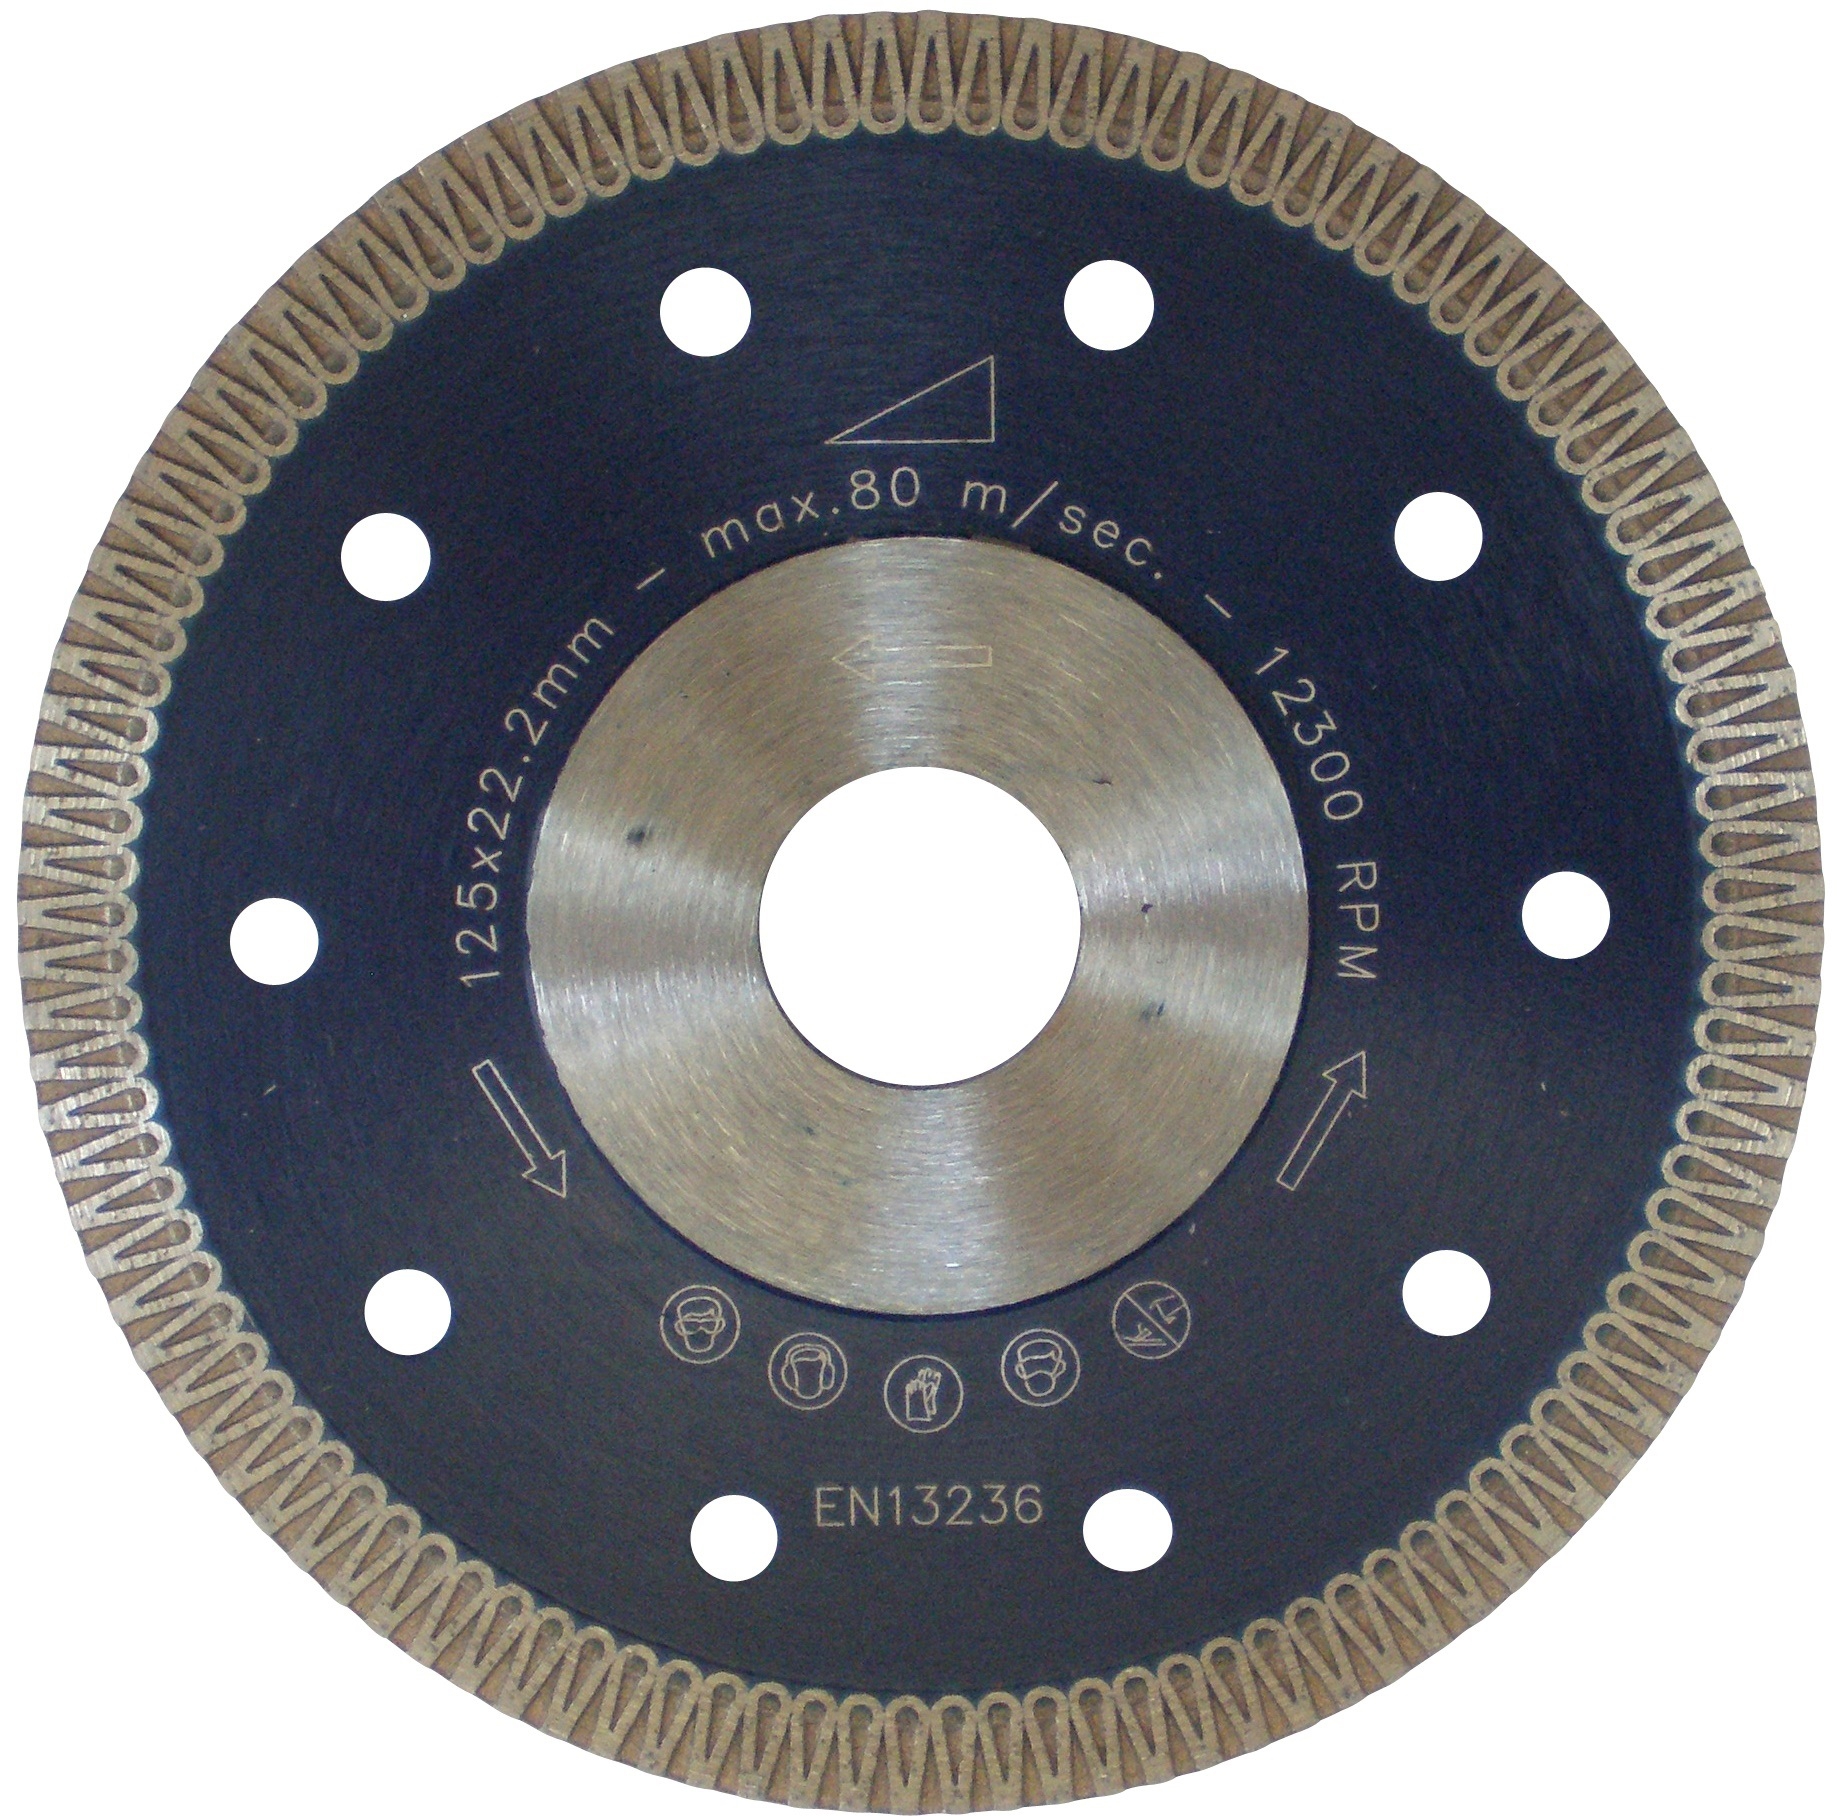 Diamond Blade for Tile, Granite, Marble and Stonew